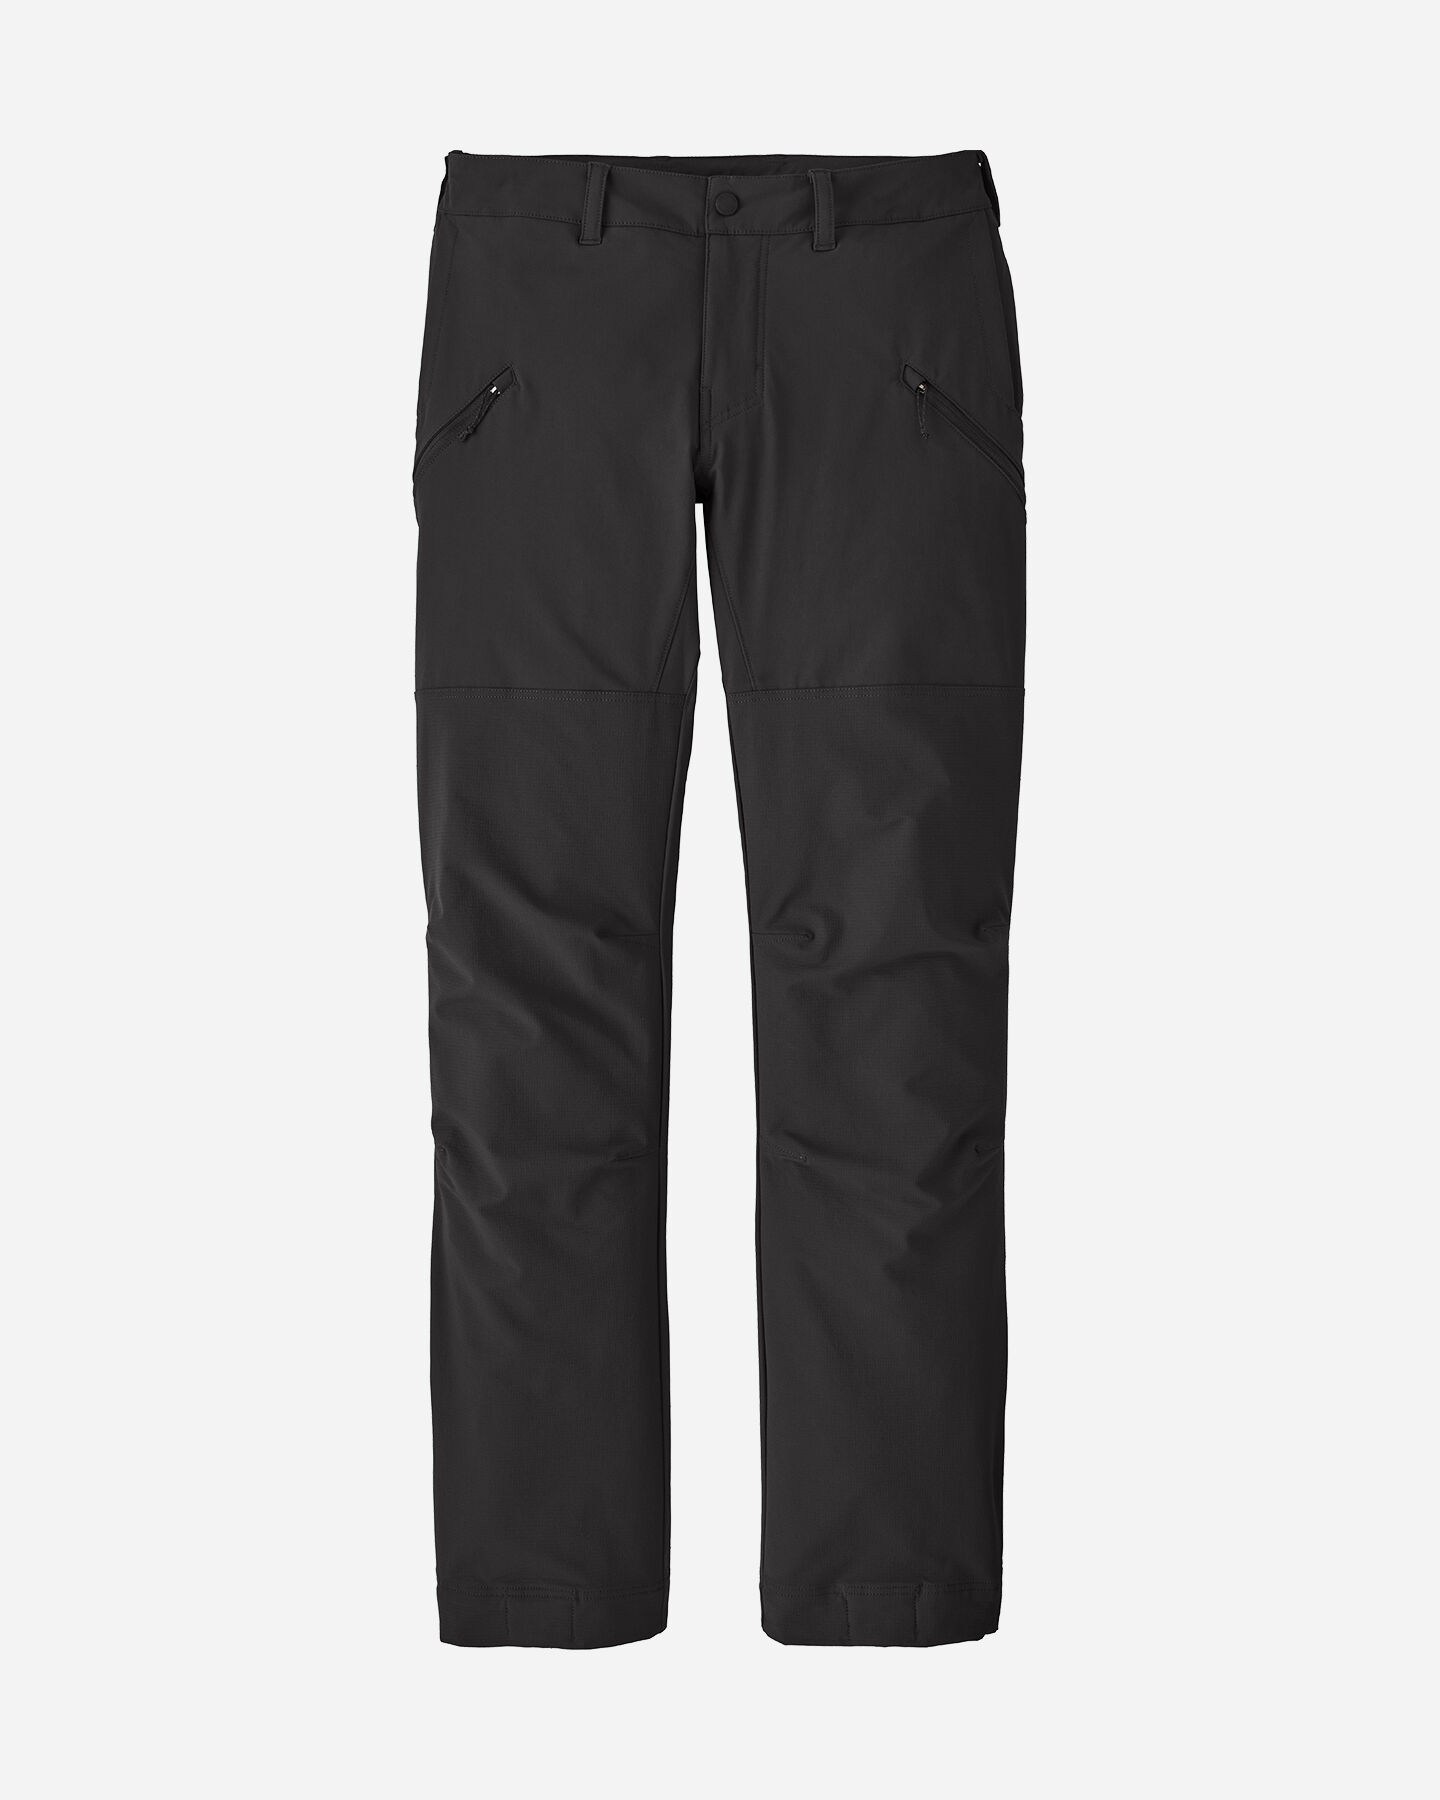  Pantalone outdoor PATAGONIA POINT PEAK TRAIL W S5443260|BLK|6 scatto 0